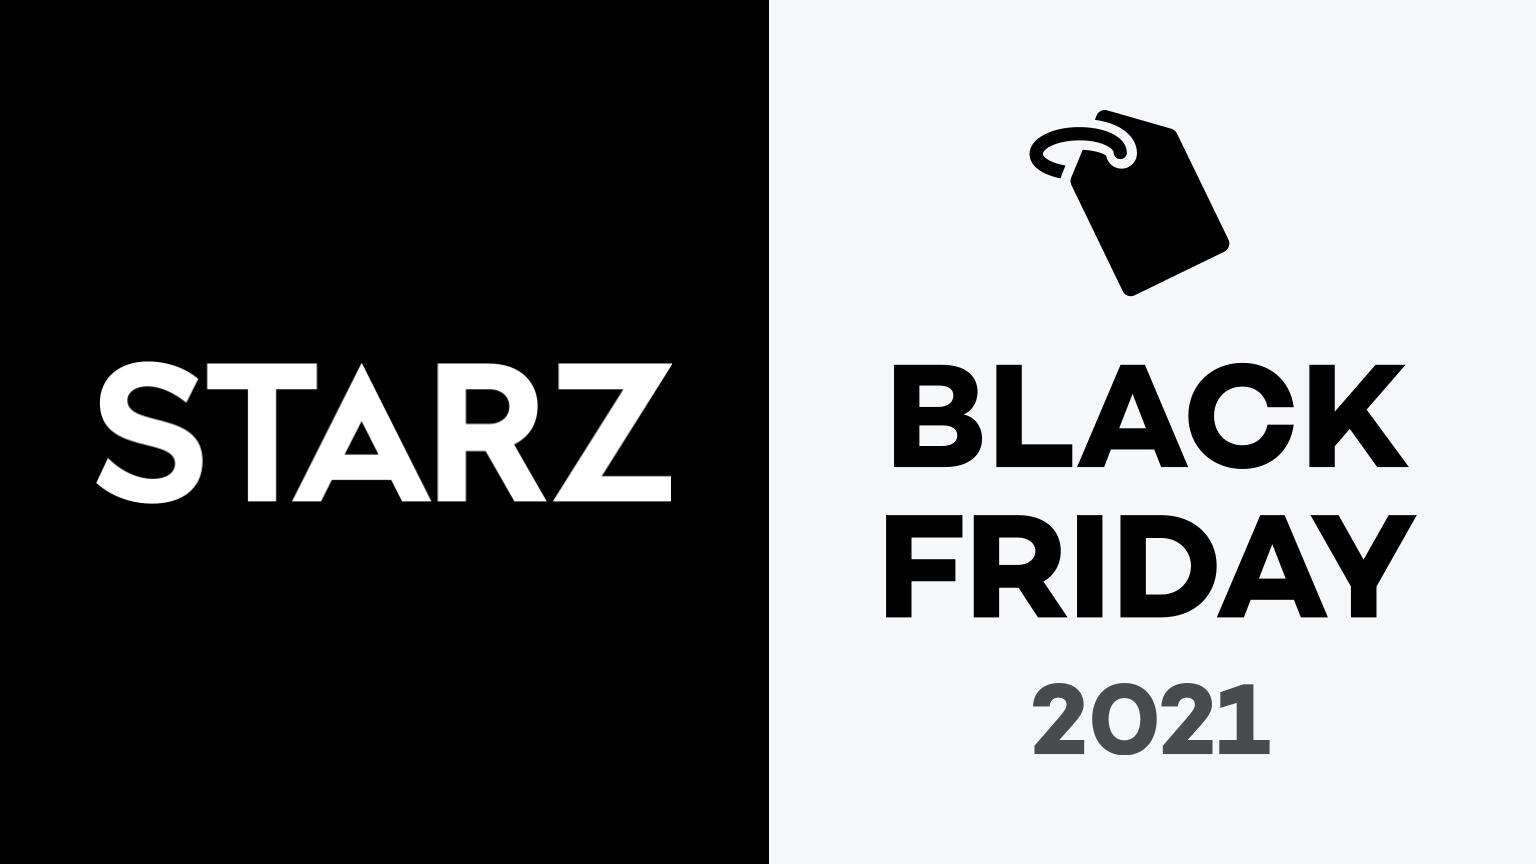 STARZ Black Friday 2021 Deals and Sales What Are the Best Ways to